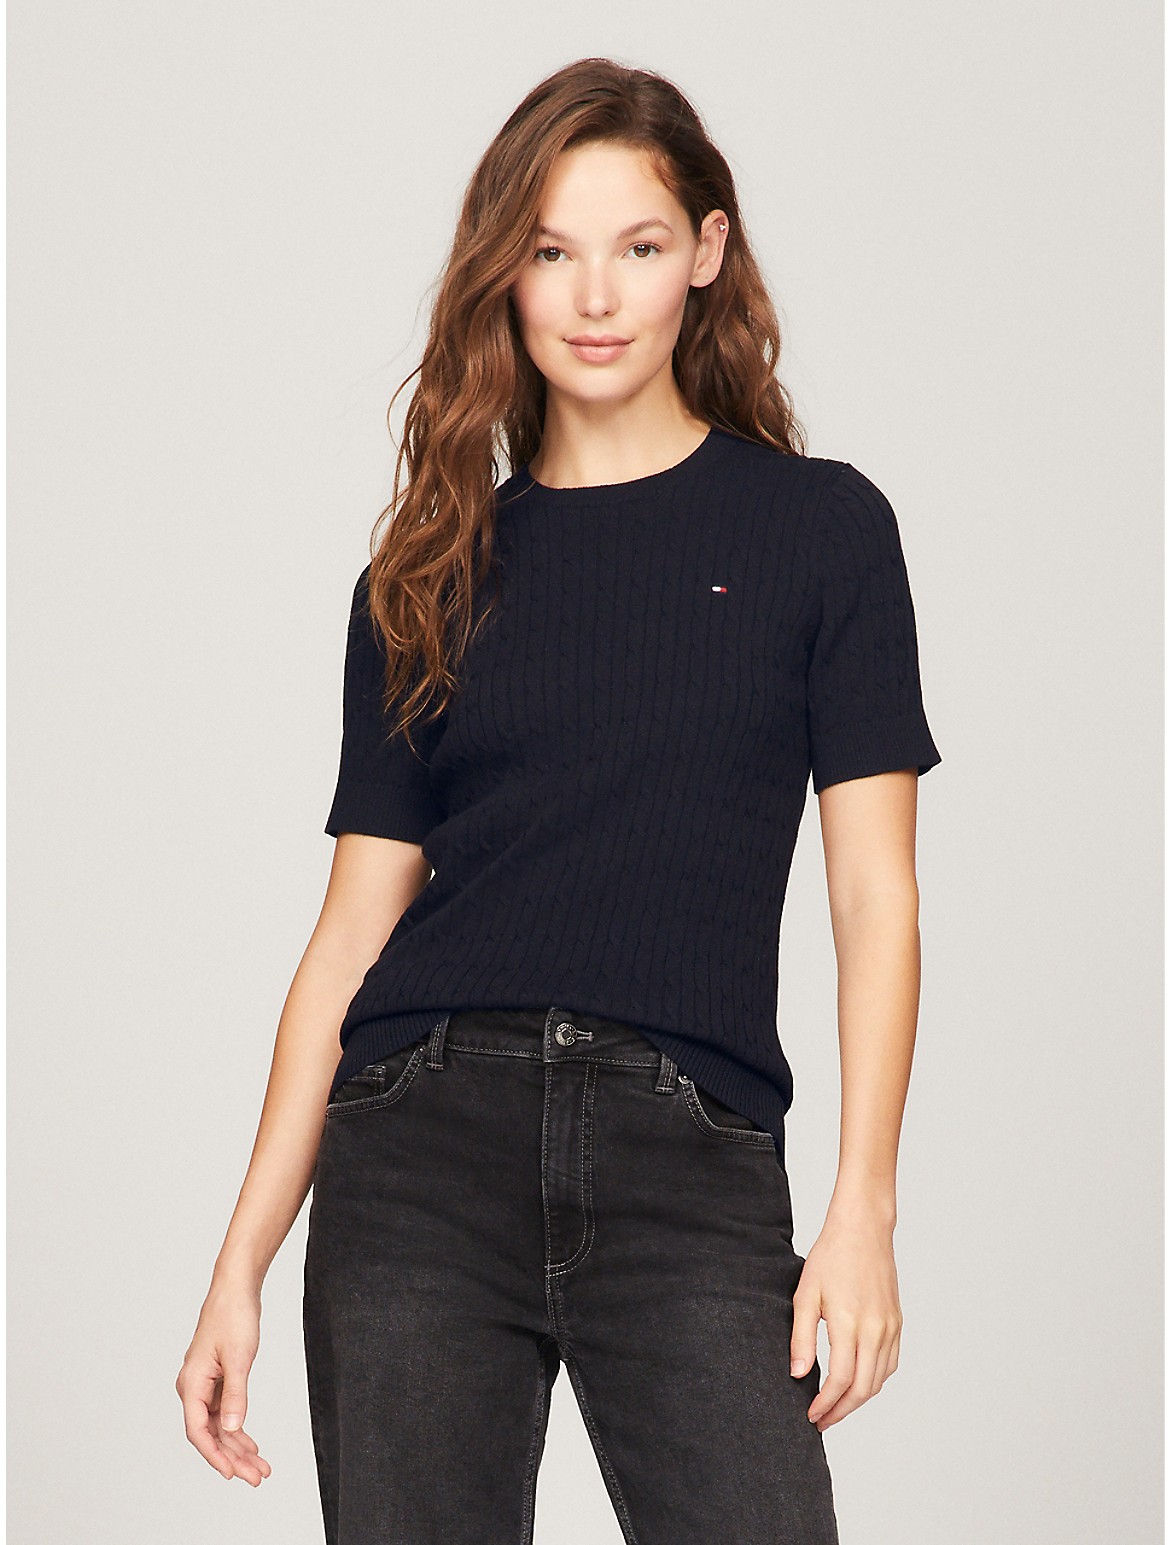 Tommy Hilfiger Women's Short-Sleeve Cable Knit Sweater